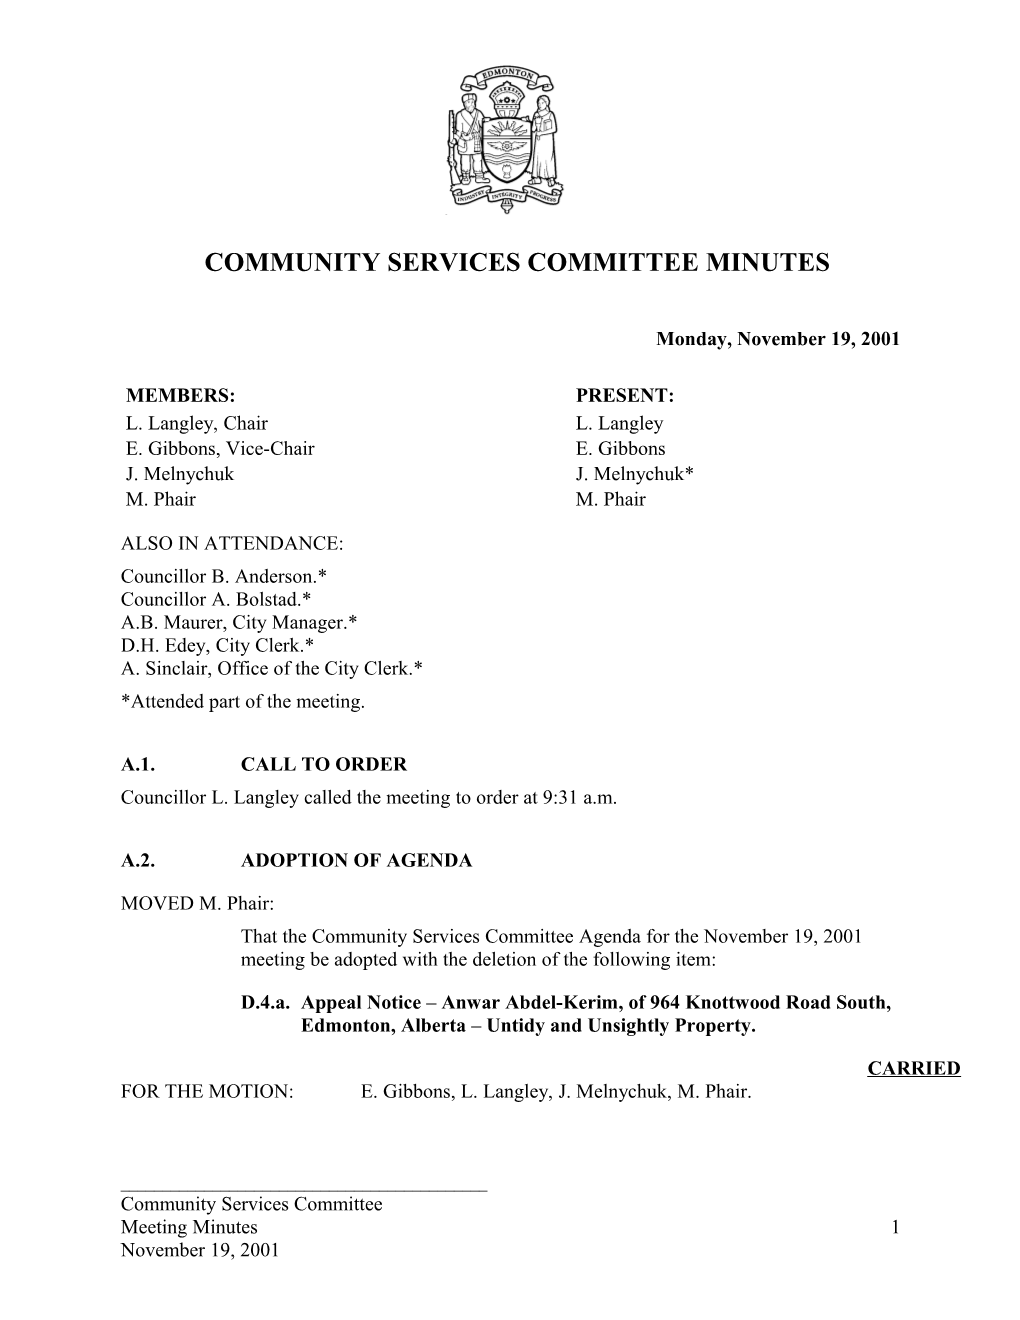 Minutes for Community Services Committee November 19, 2001 Meeting